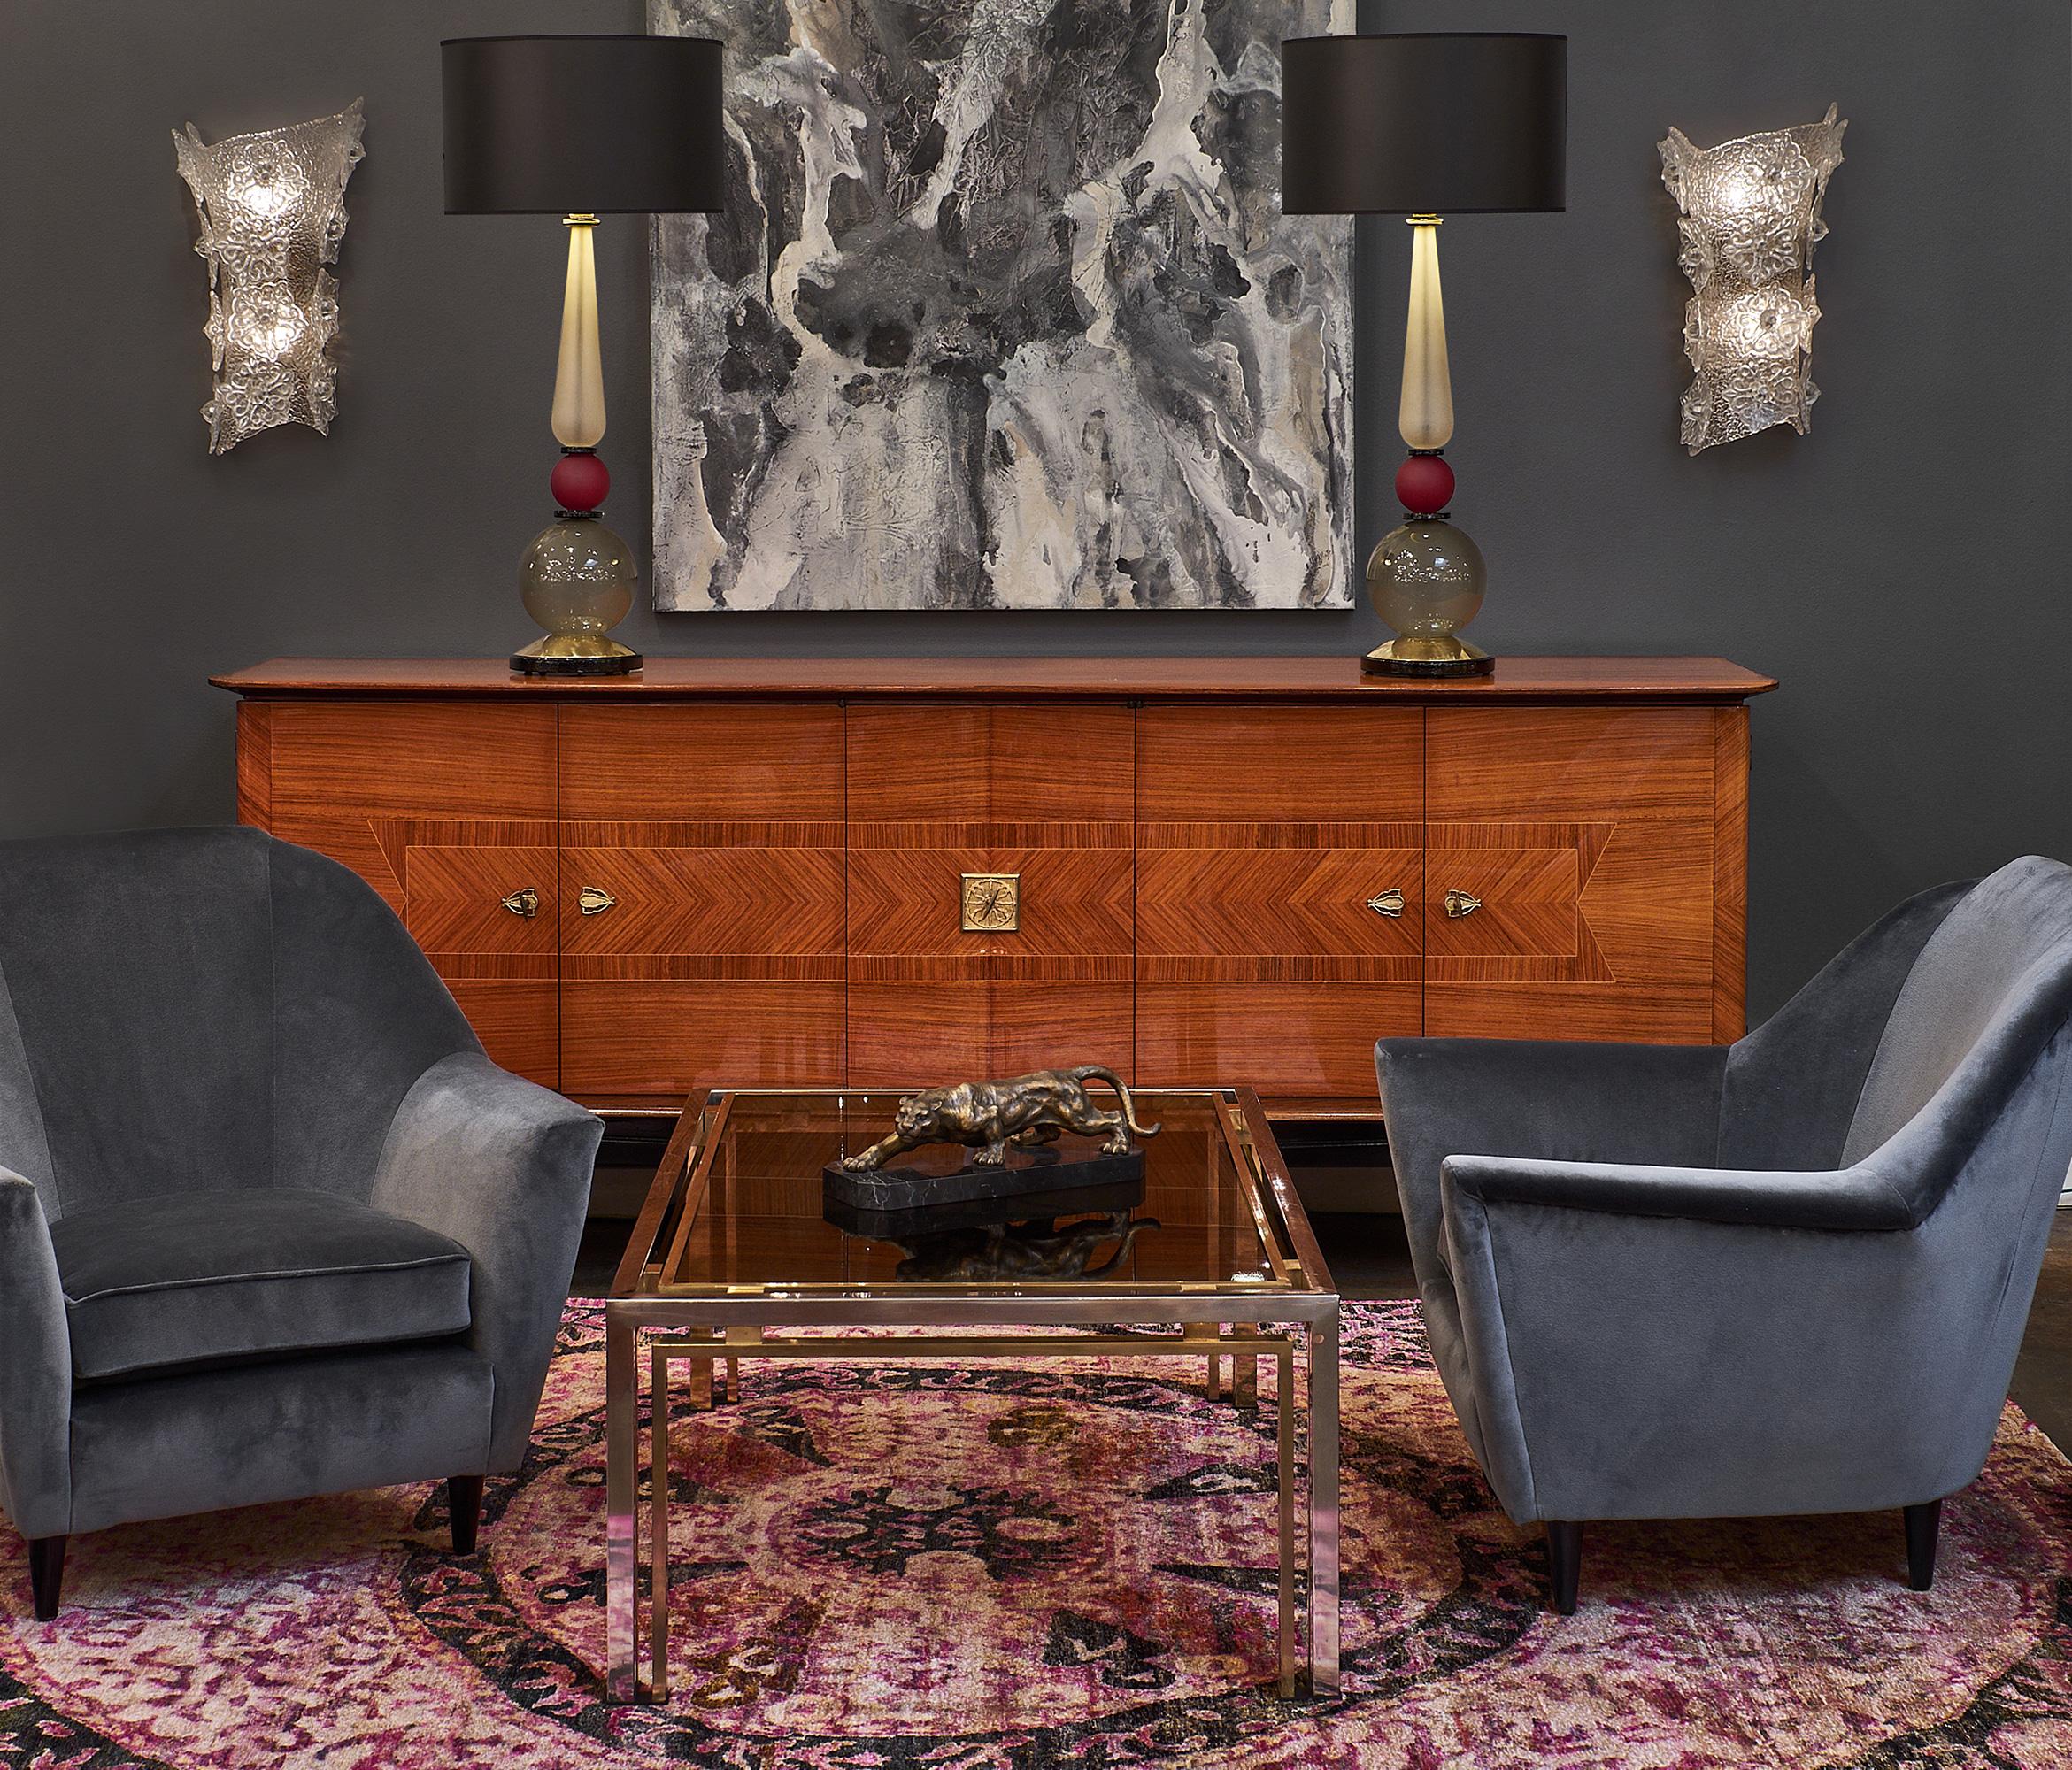 Pair of sumptuous Italian velvet armchairs by Carlo di Carli with ebonized wooden feet. This pair has been newly reupholstered with dark grey cotton velvet. The armchairs are very deep and comfortable.